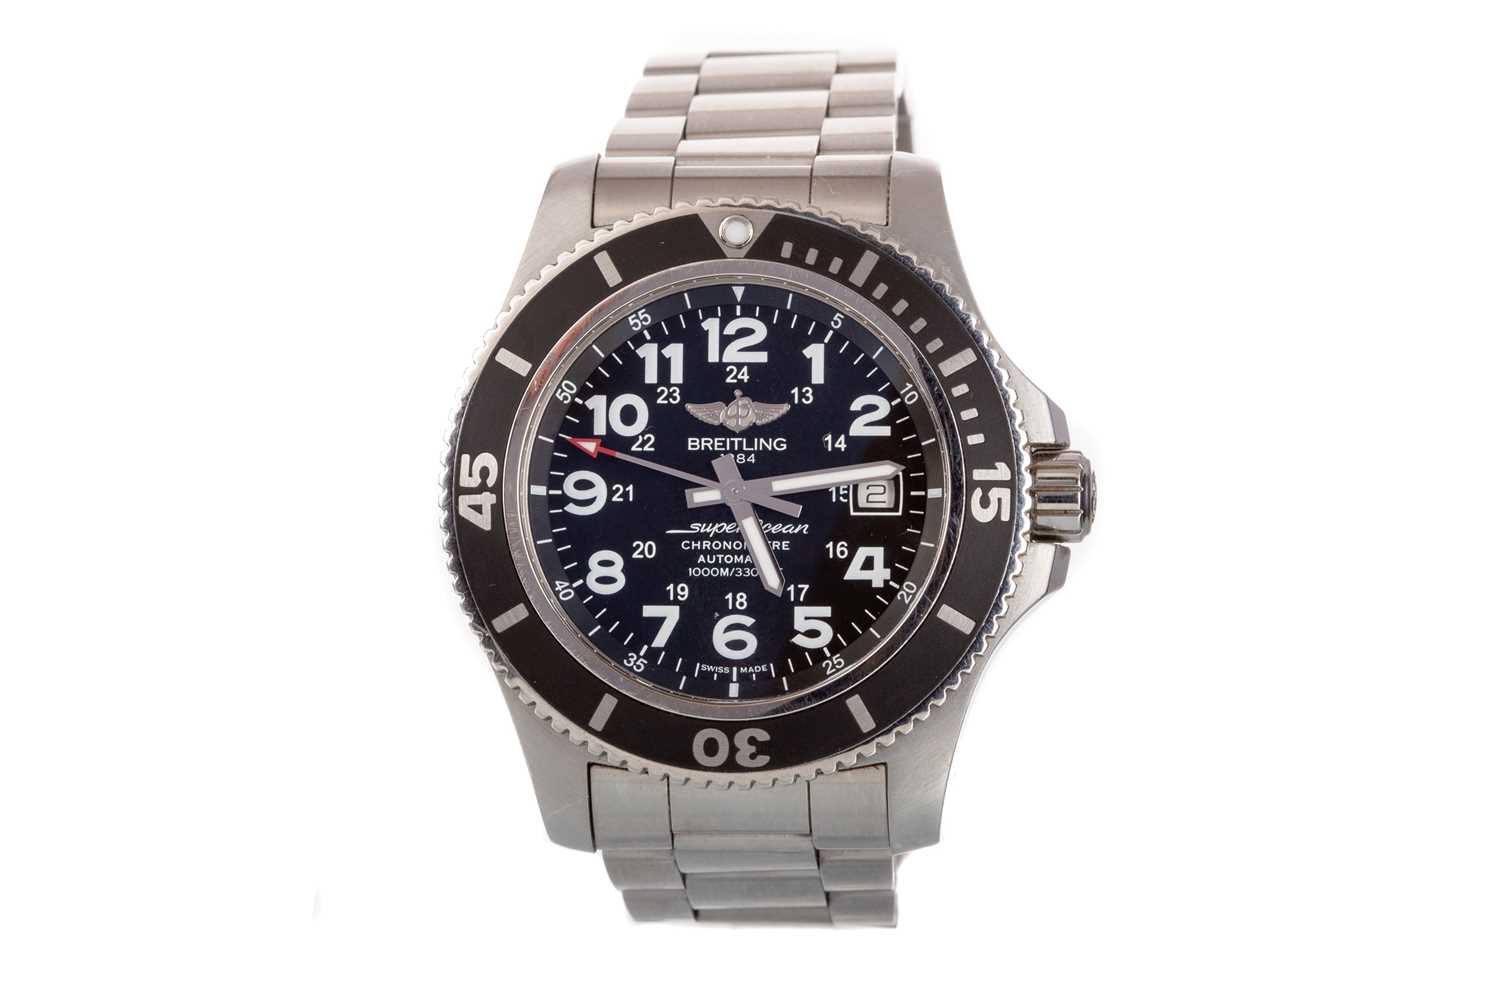 BREITLING SUPEROCEAN II 44 STAINLESS STEEL AUTOMATIC WRIST WATCH, - Image 2 of 2